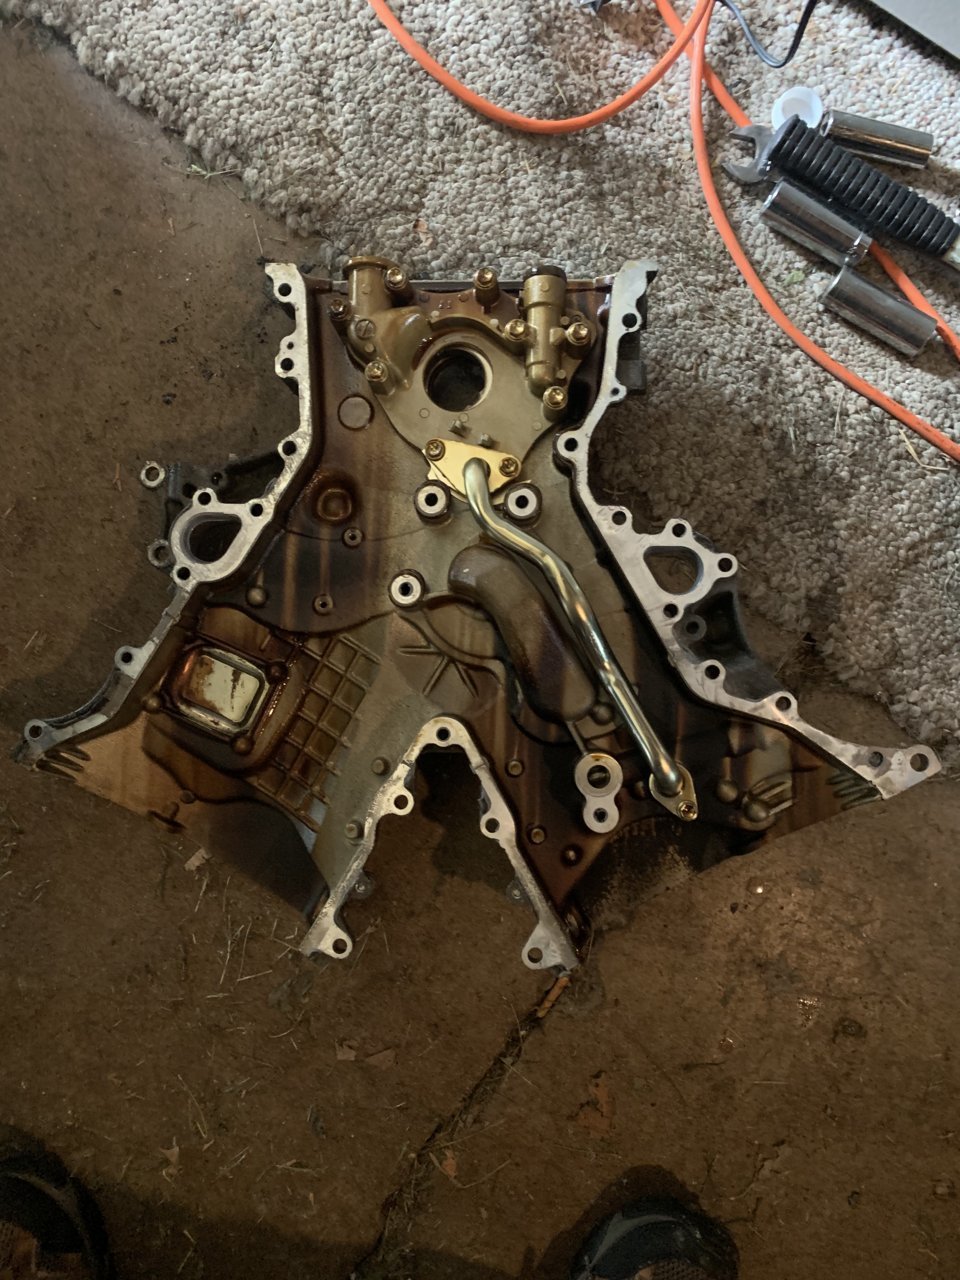 4.0 Timing Cover Leak repair help and tear down pictures